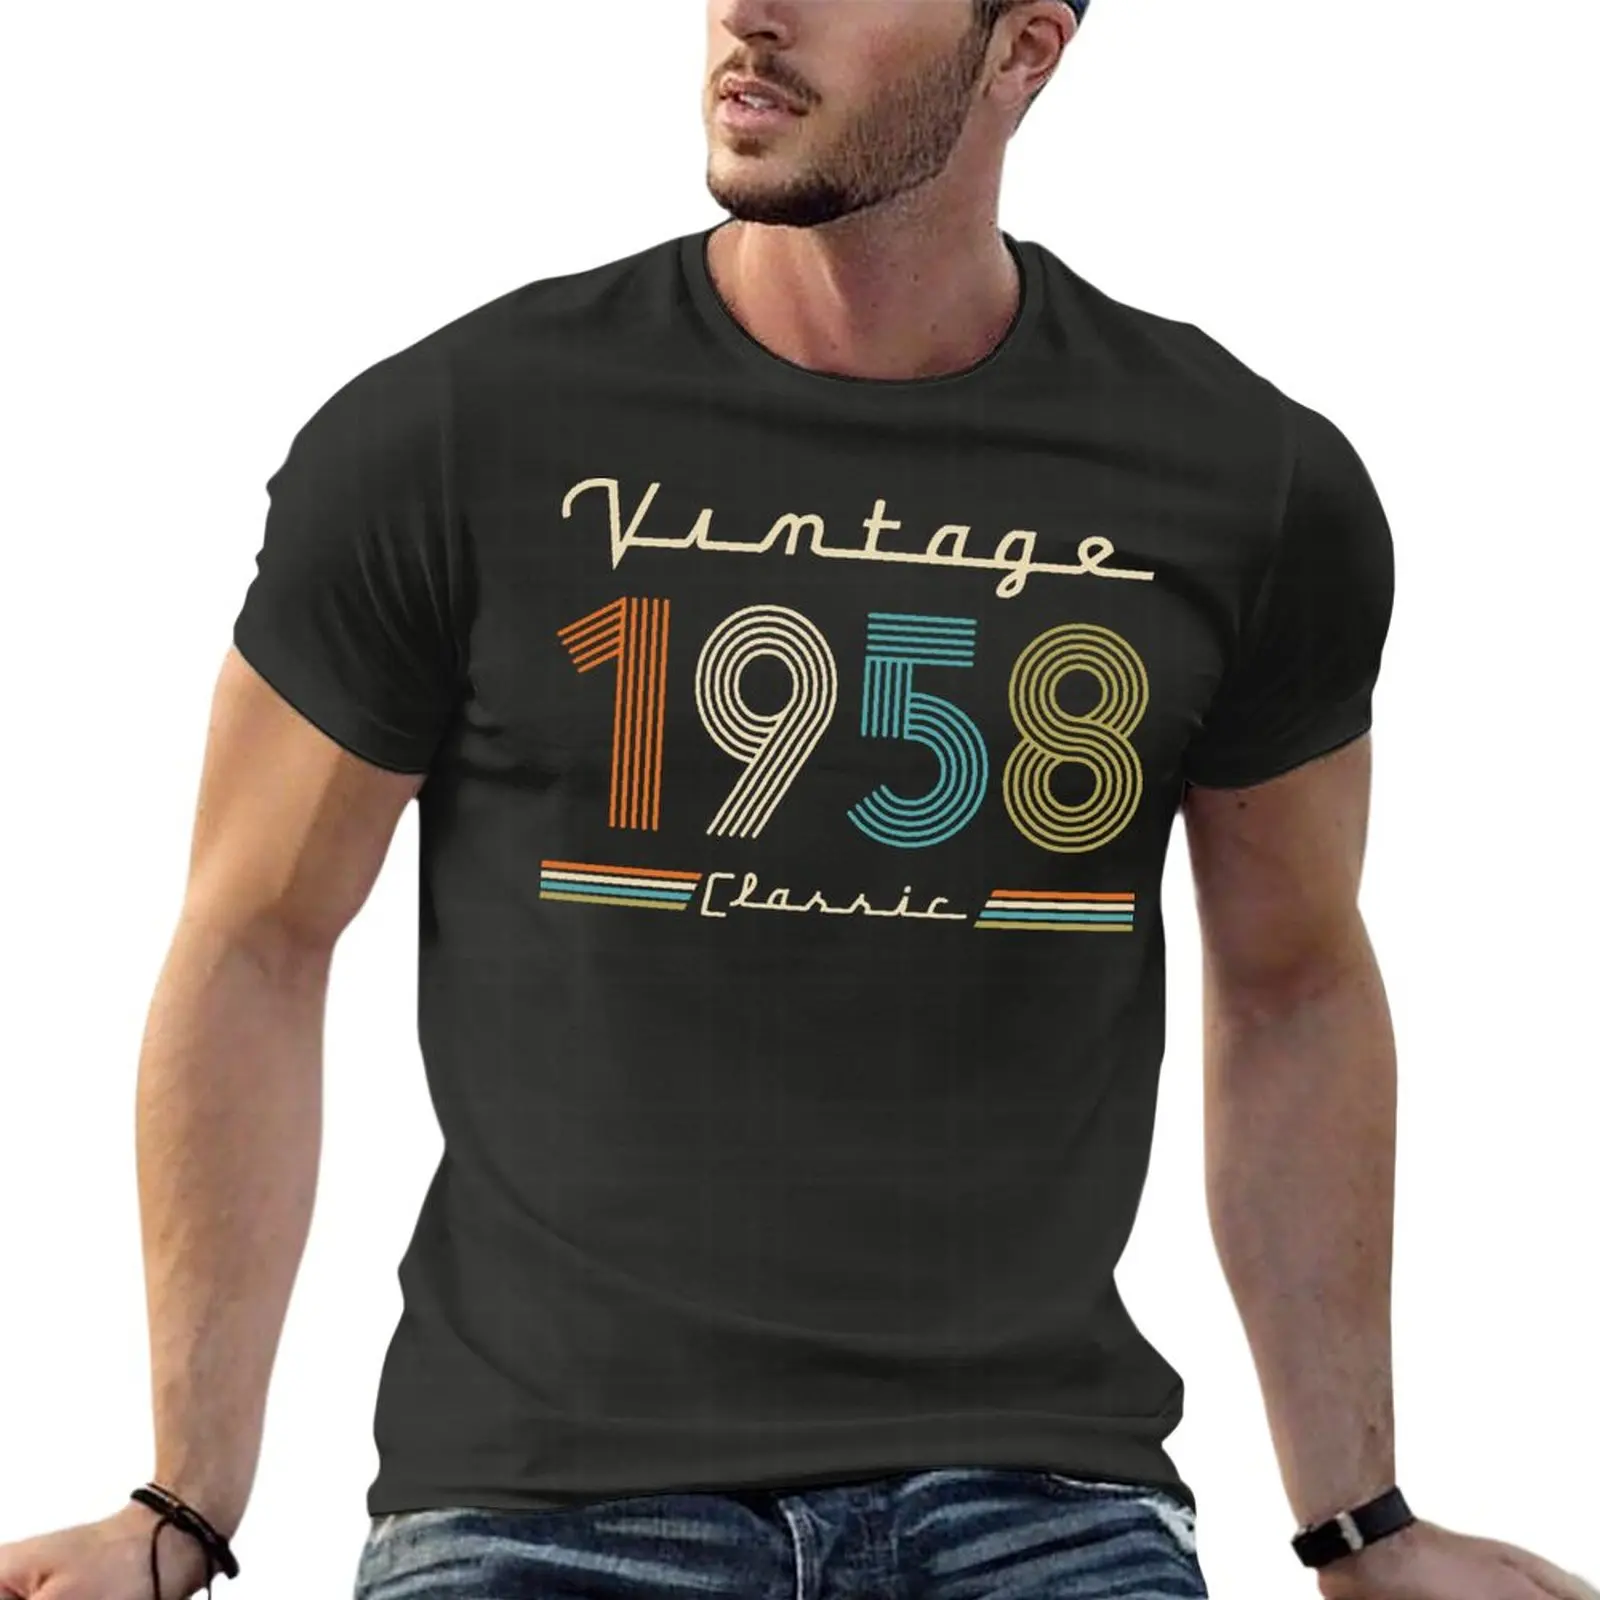 Vintage 1958 Gift Father'S Day Oversized T Shirt Harajuku Mens Clothing Short Sleeve Streetwear Plus Size Top Tee